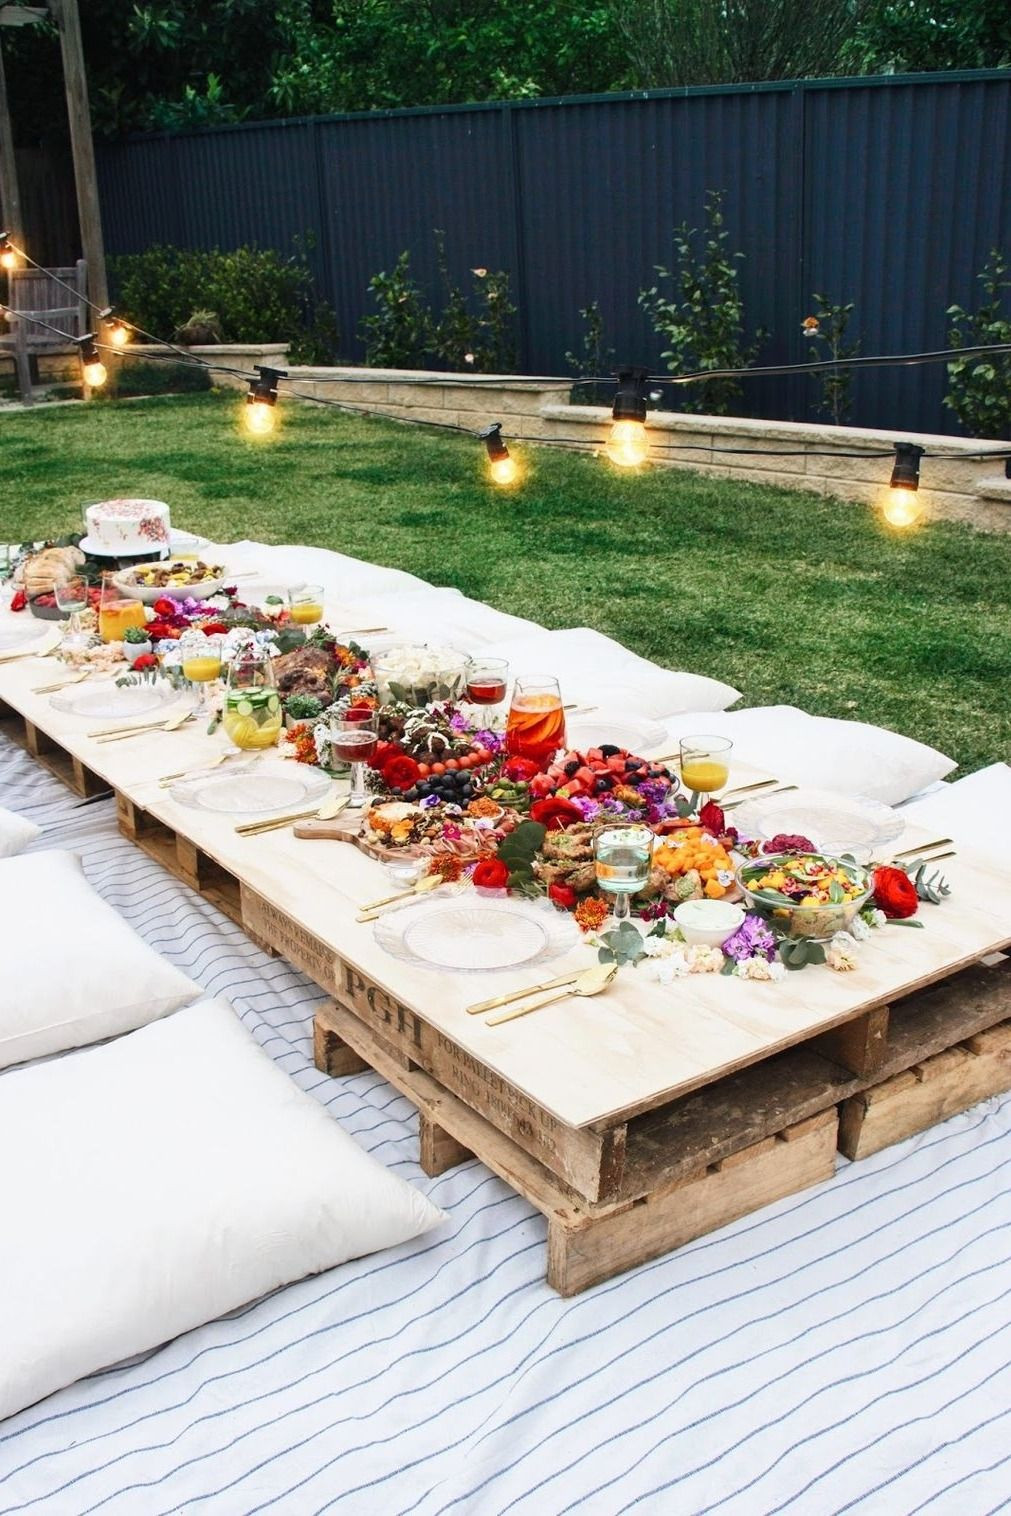 All White Backyard Party Ideas
 The Lazy Girl’s Guide To Throwing A Great Party